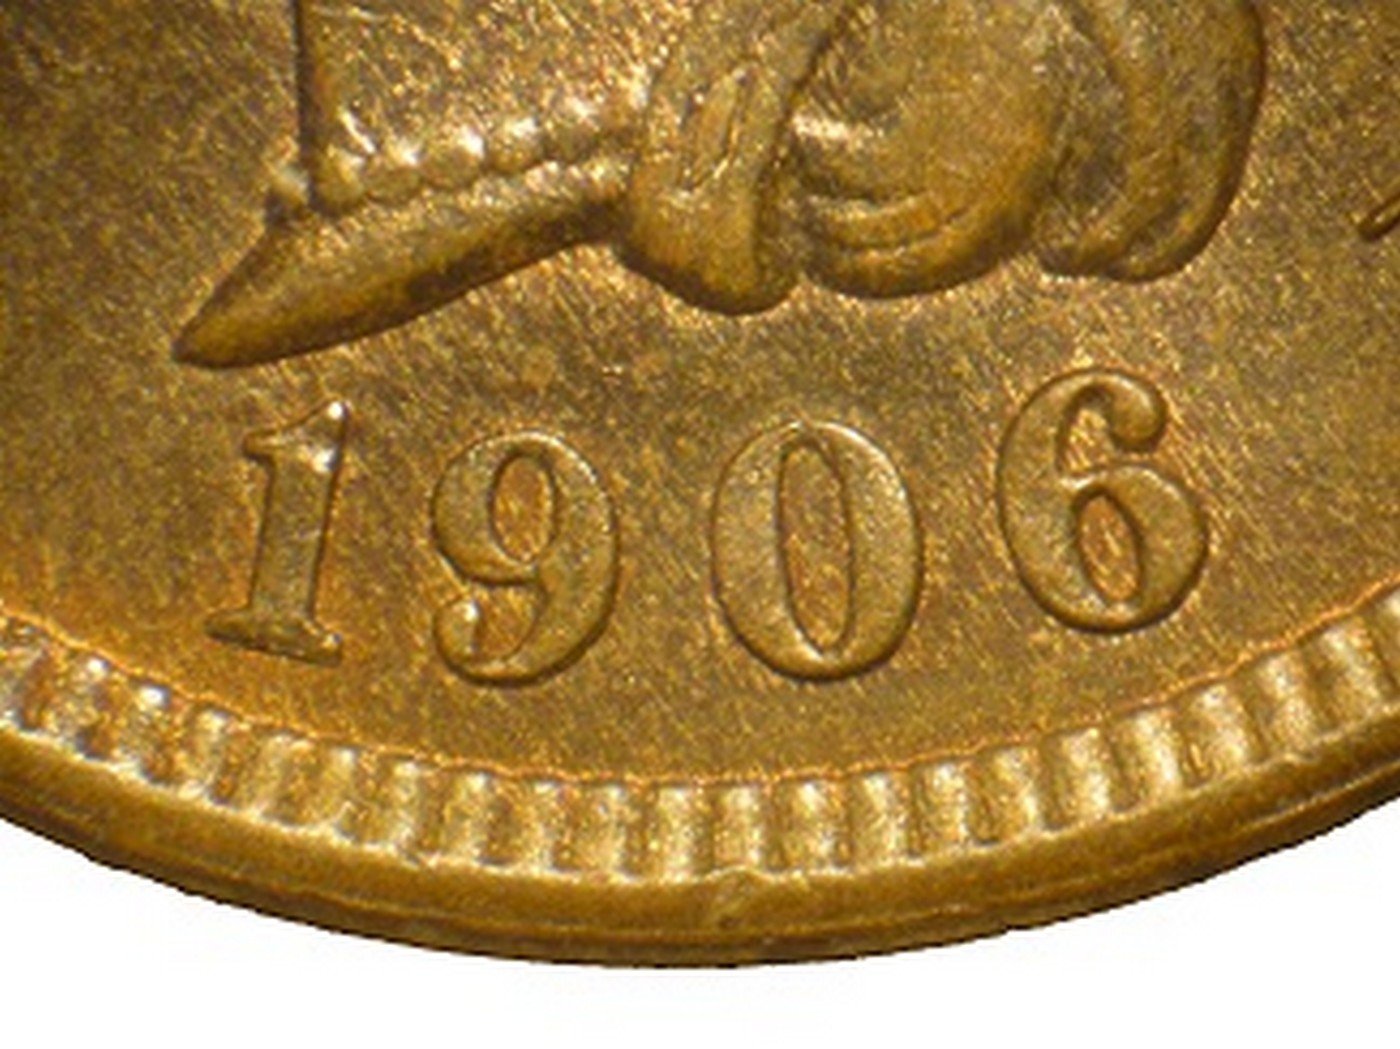 1906 RPD-018 - Indian Head Penny - Photo by David Poliquin